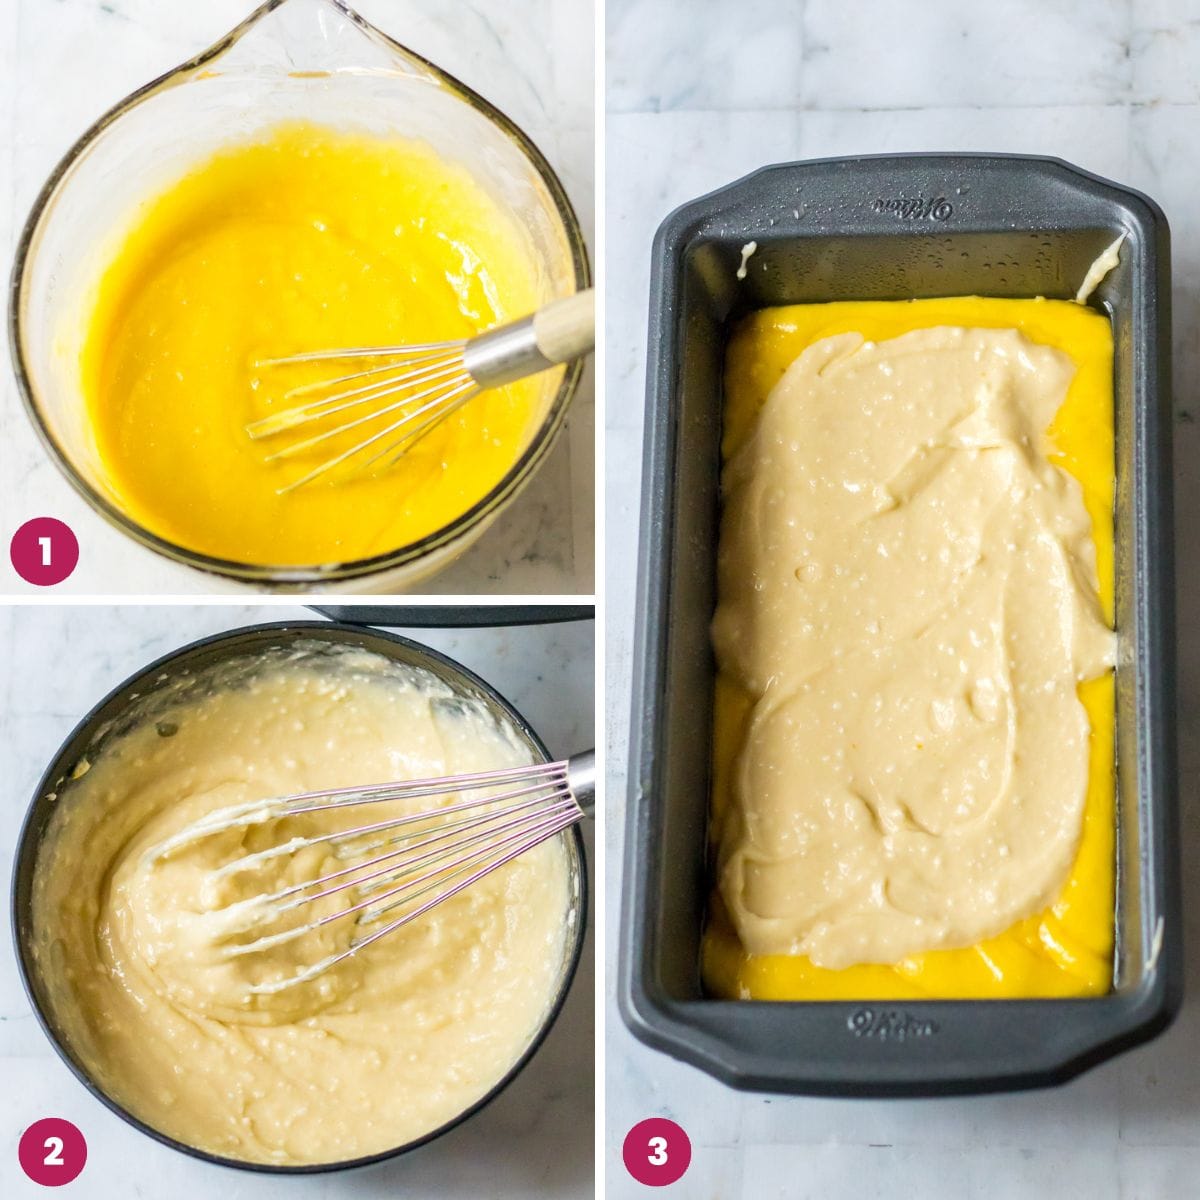 Collage of 3 images showing how to make the lemon cheesecake mixtures and adding them to a loaf pan